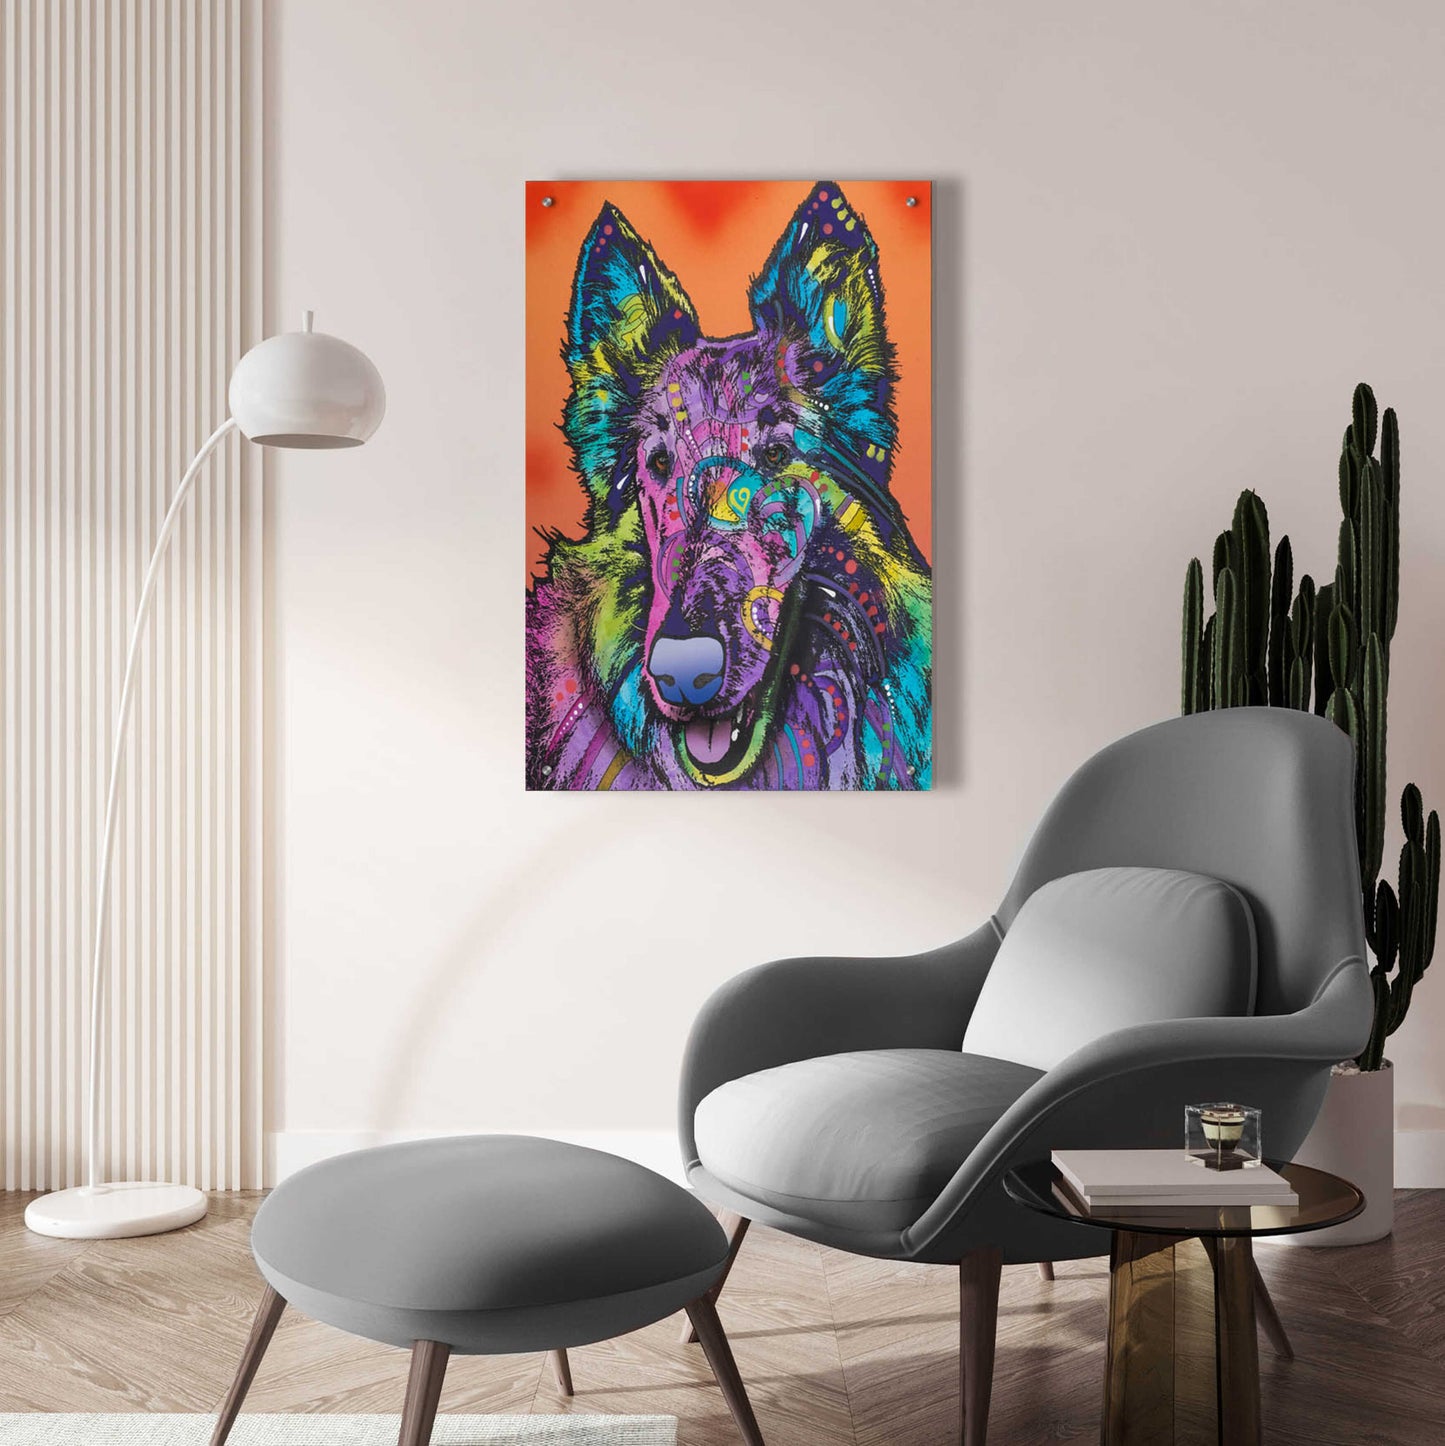 Epic Art 'Ava' by Dean Russo, Acrylic Glass Wall Art,24x36